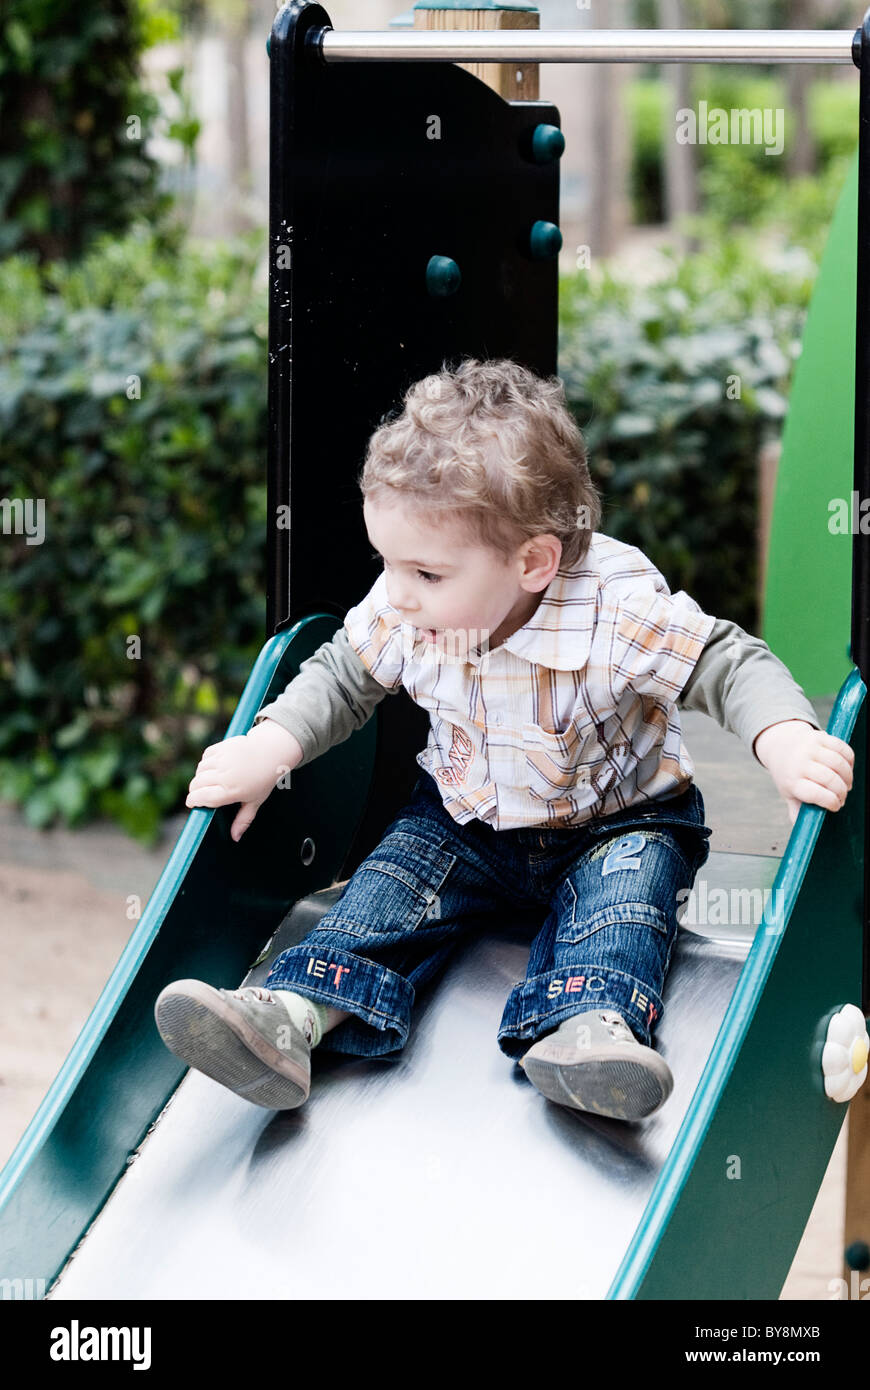 Child playing on a slide Stock Photo